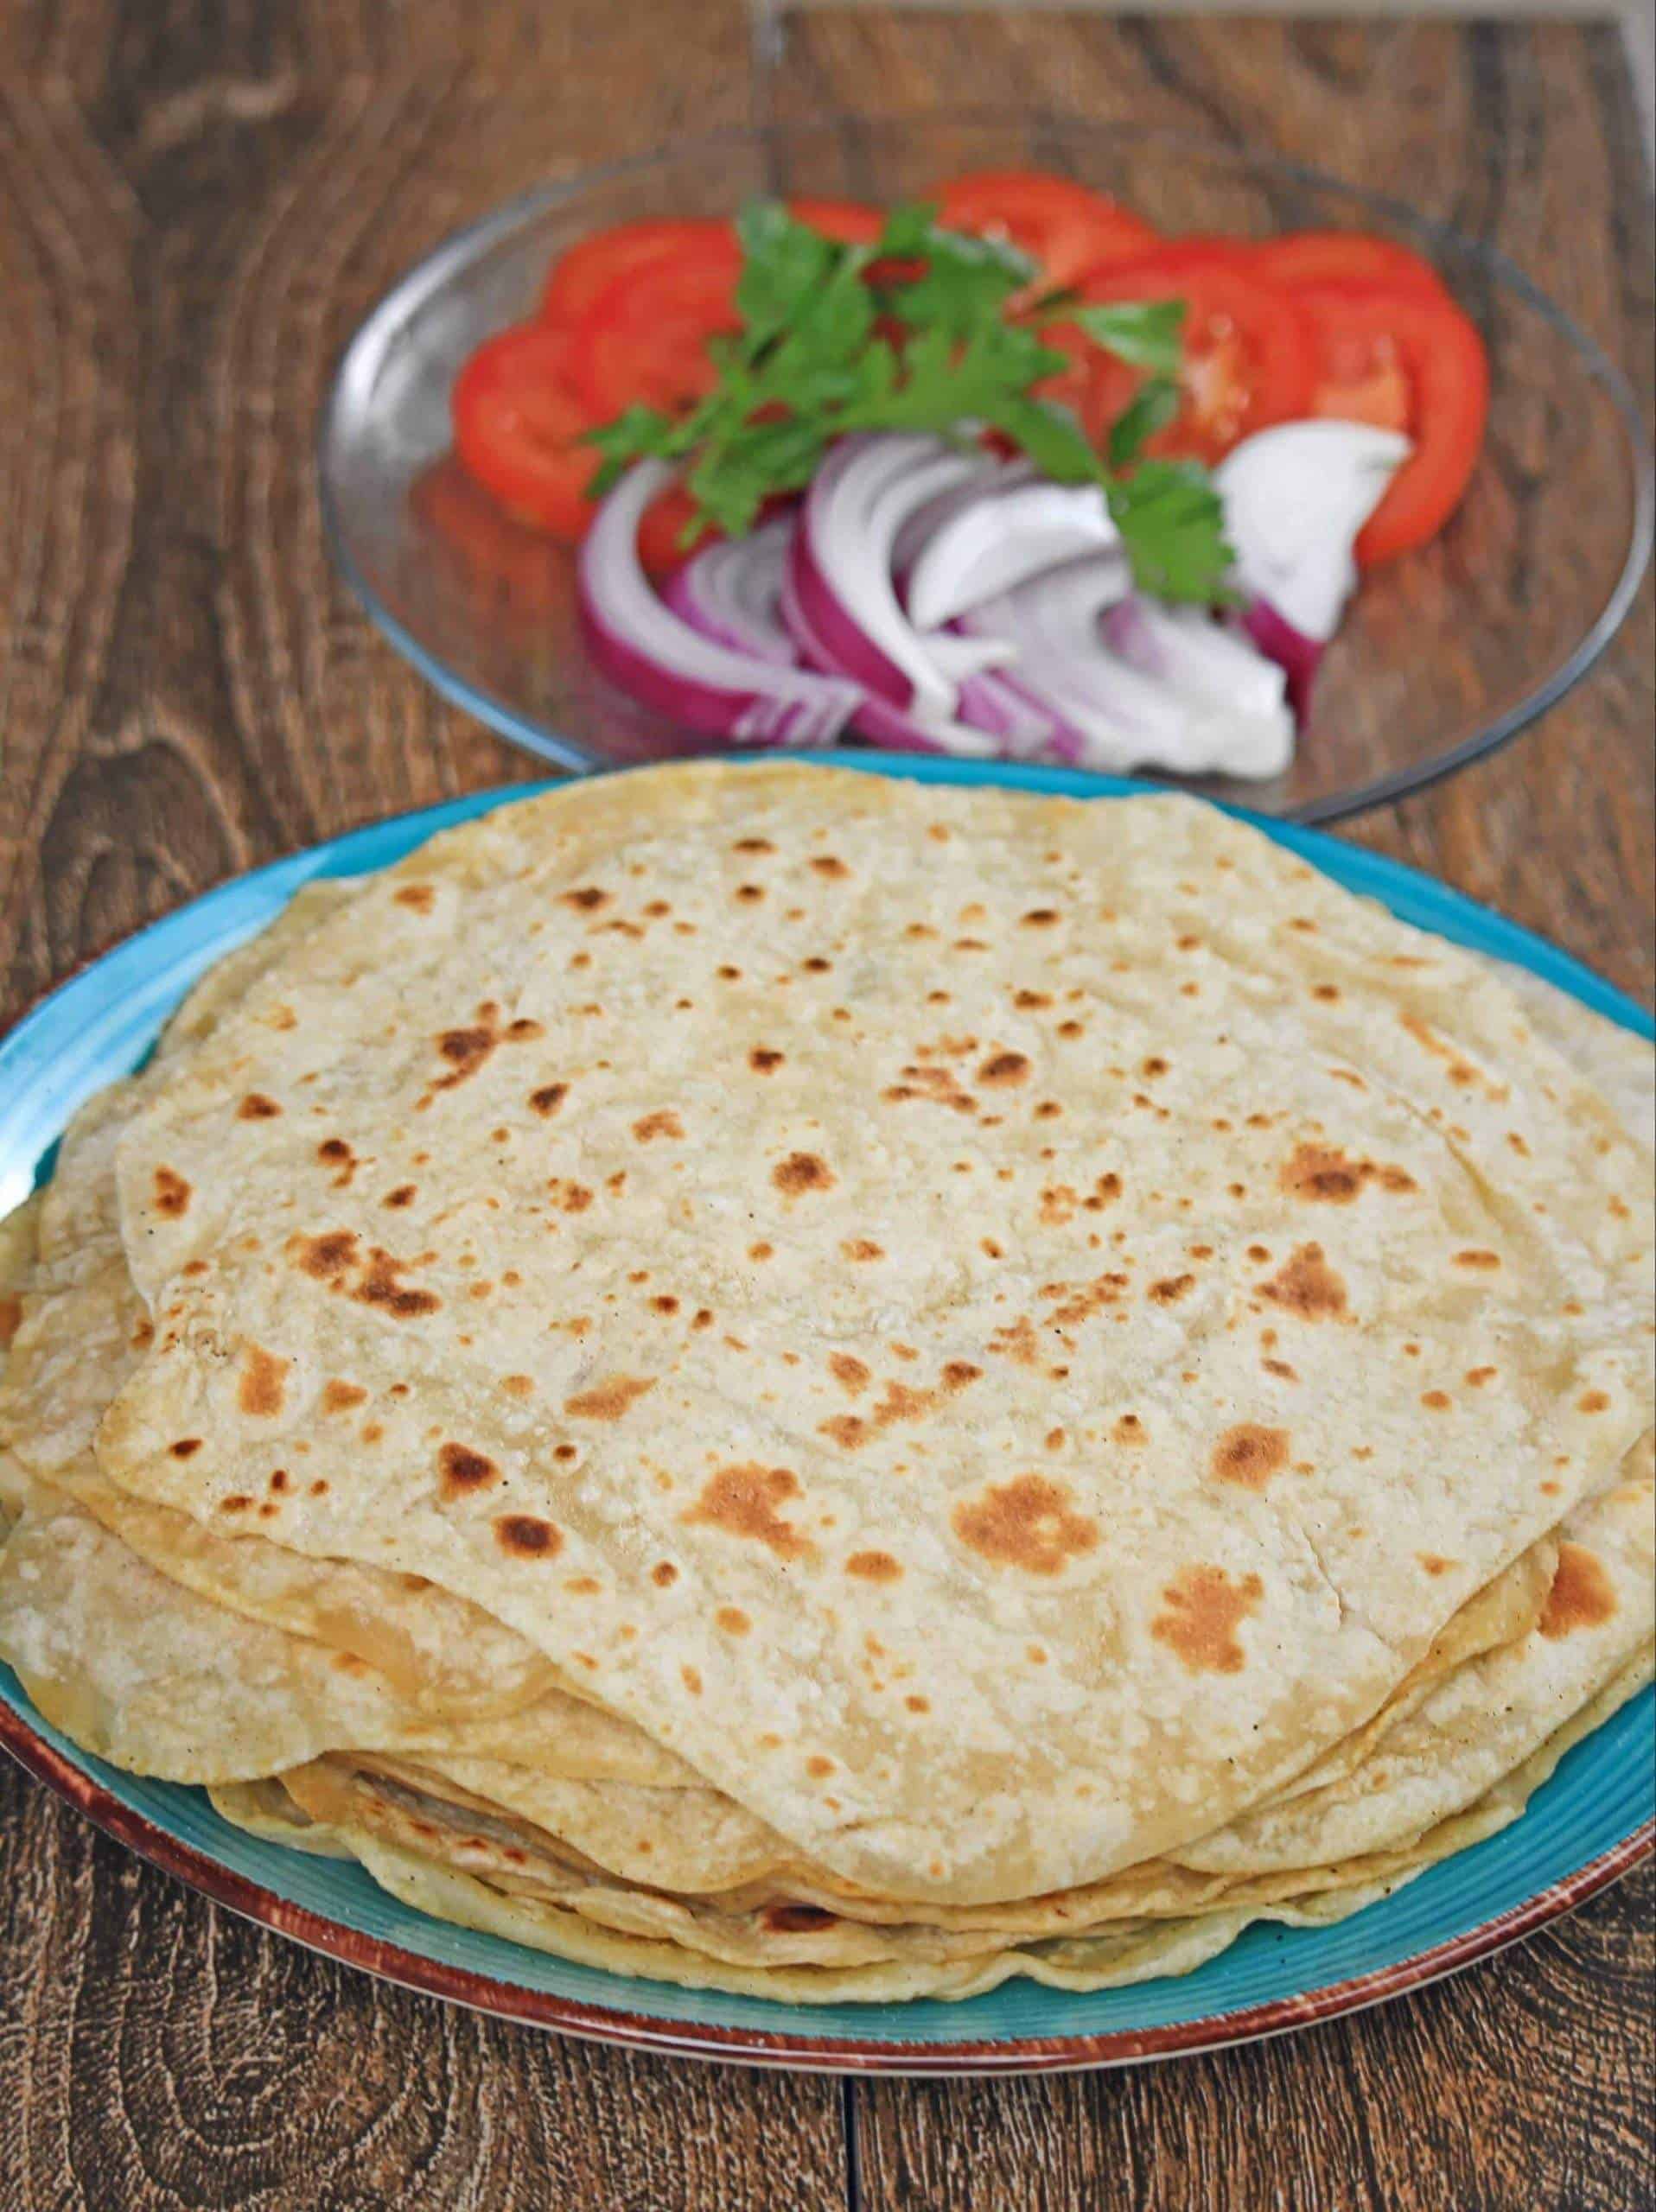 Turkish flatbread with salad in the background